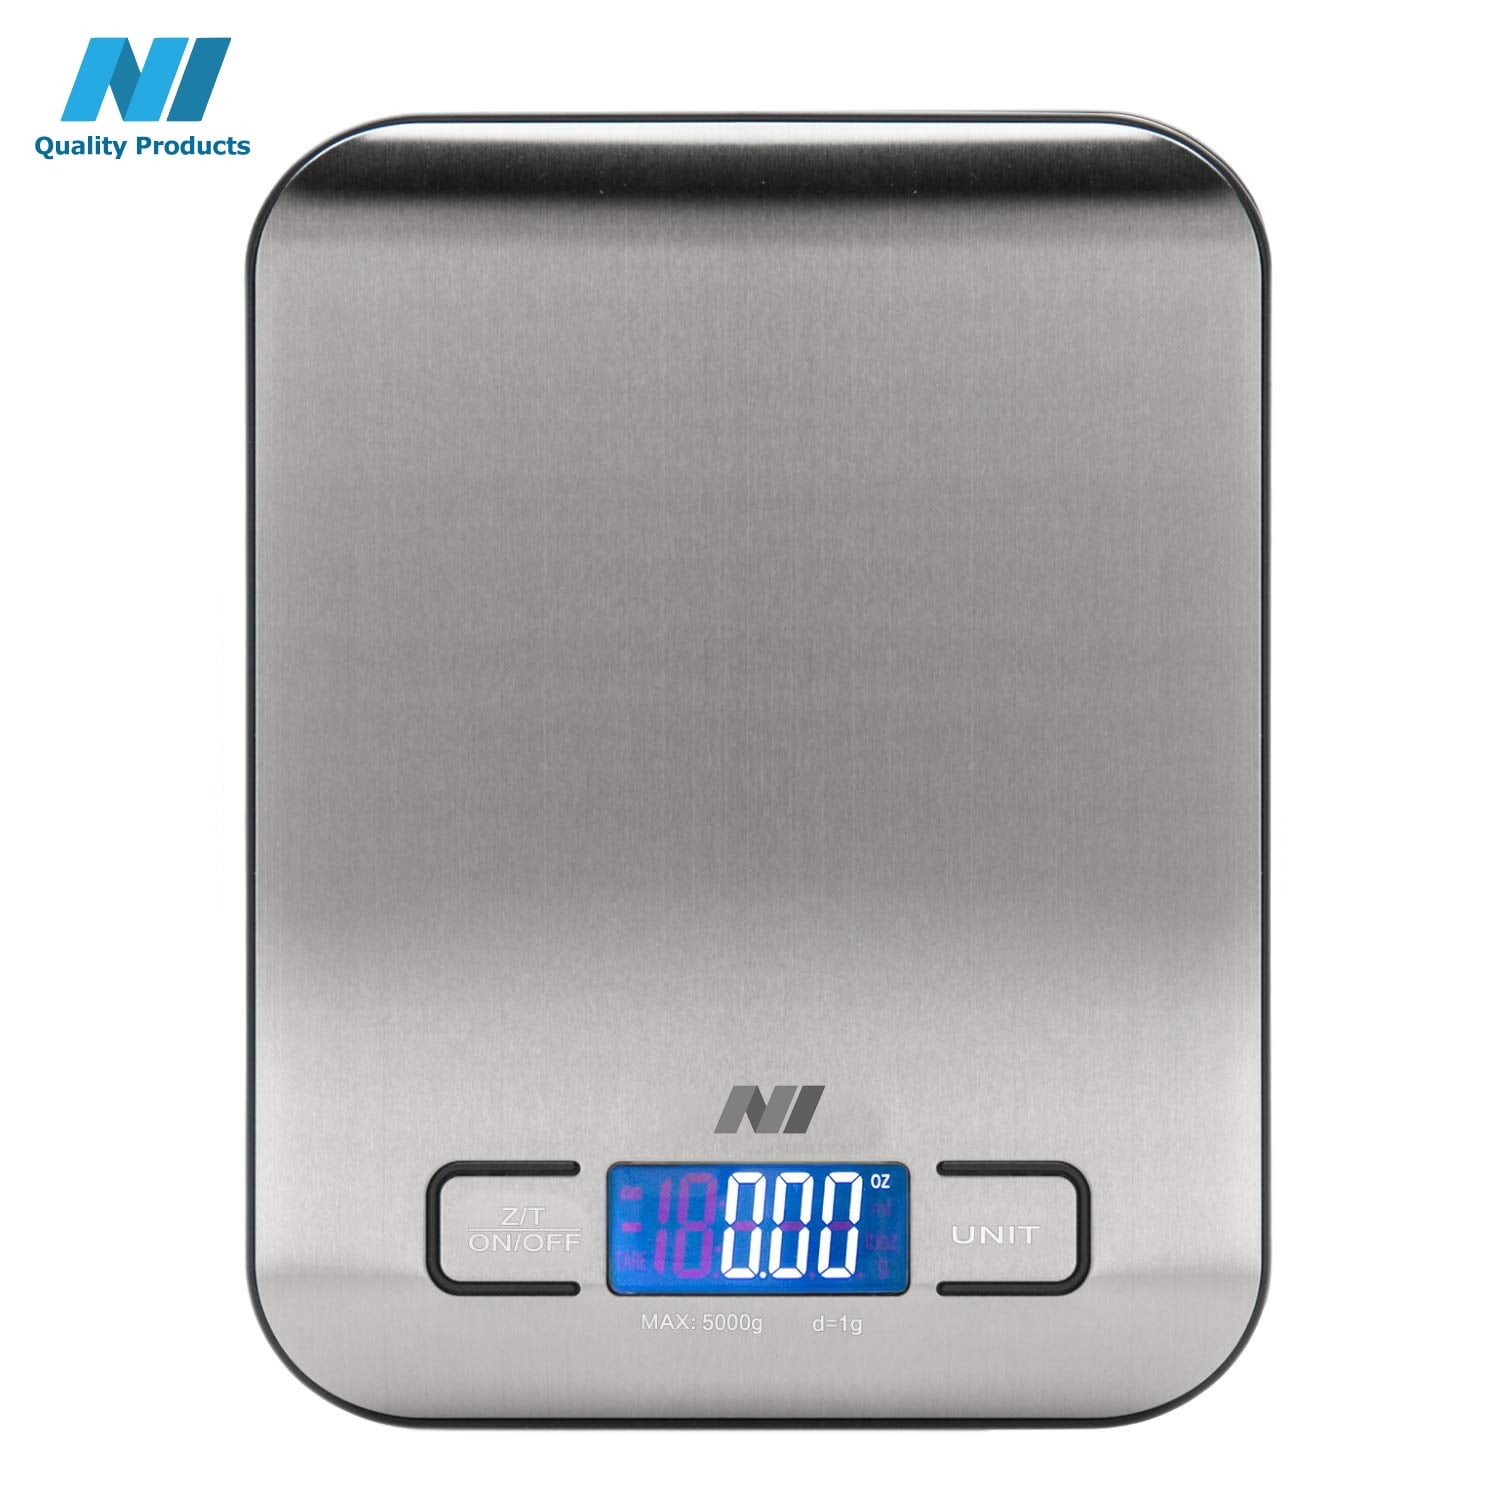 Digital Kitchen Food Scale Weighing Cooking Scale Grams and Ounces with Stainless Steel Platform and LCD Display Up to 11 lb/5kg, Silver HY-0021